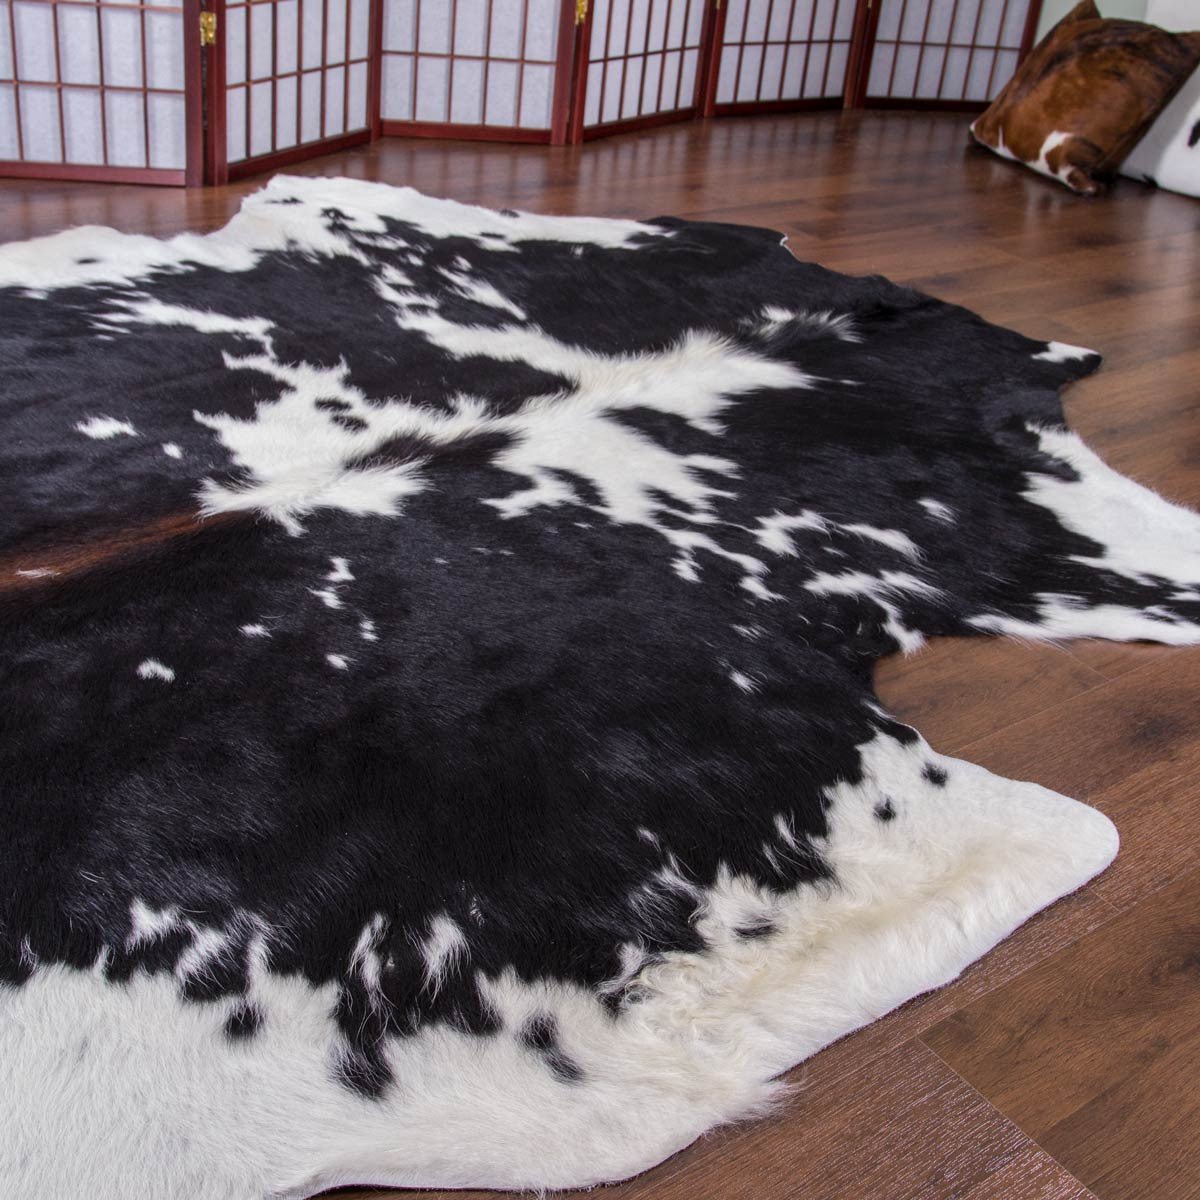 Black & White with Brown Shade Line Cowhide Rug - Rodeo Cowhide Rugs5x6